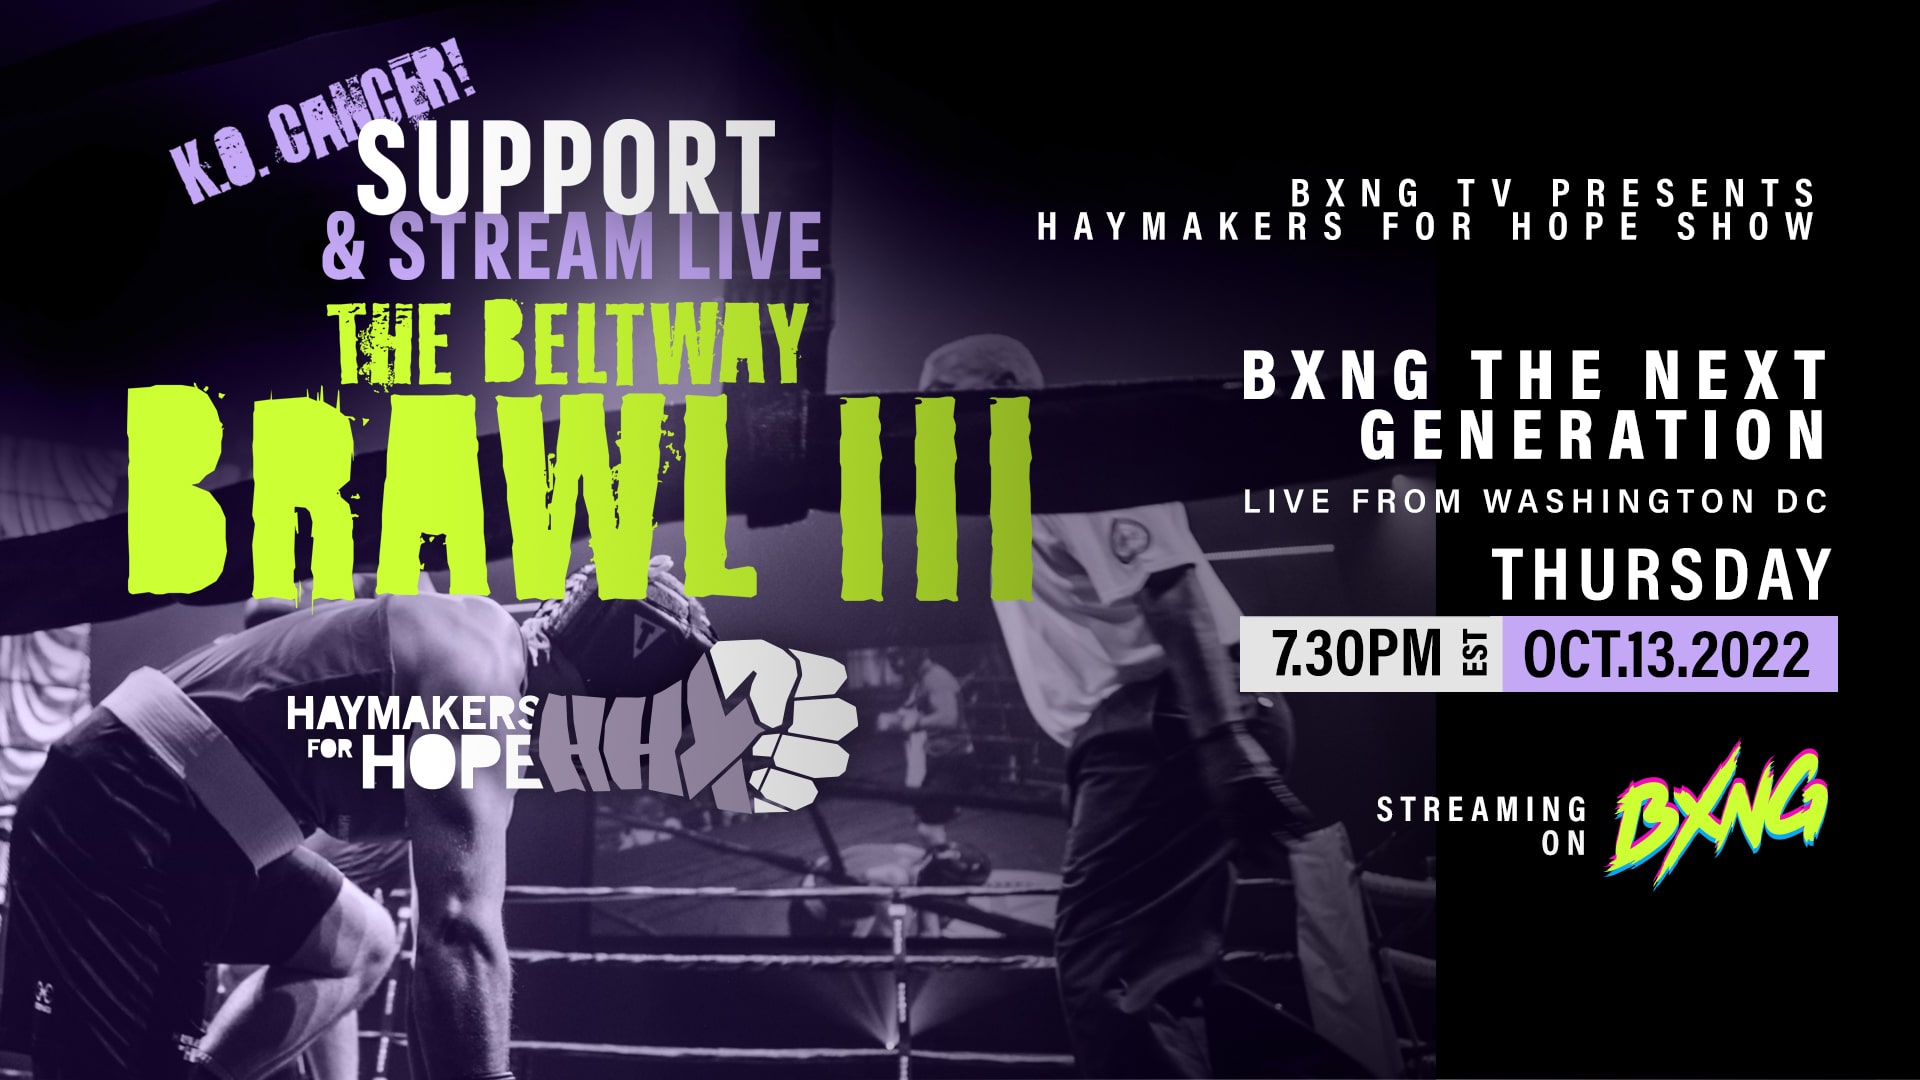 BXNG TV Presents Haymakers for Hope Show Live Stream 10/13/22